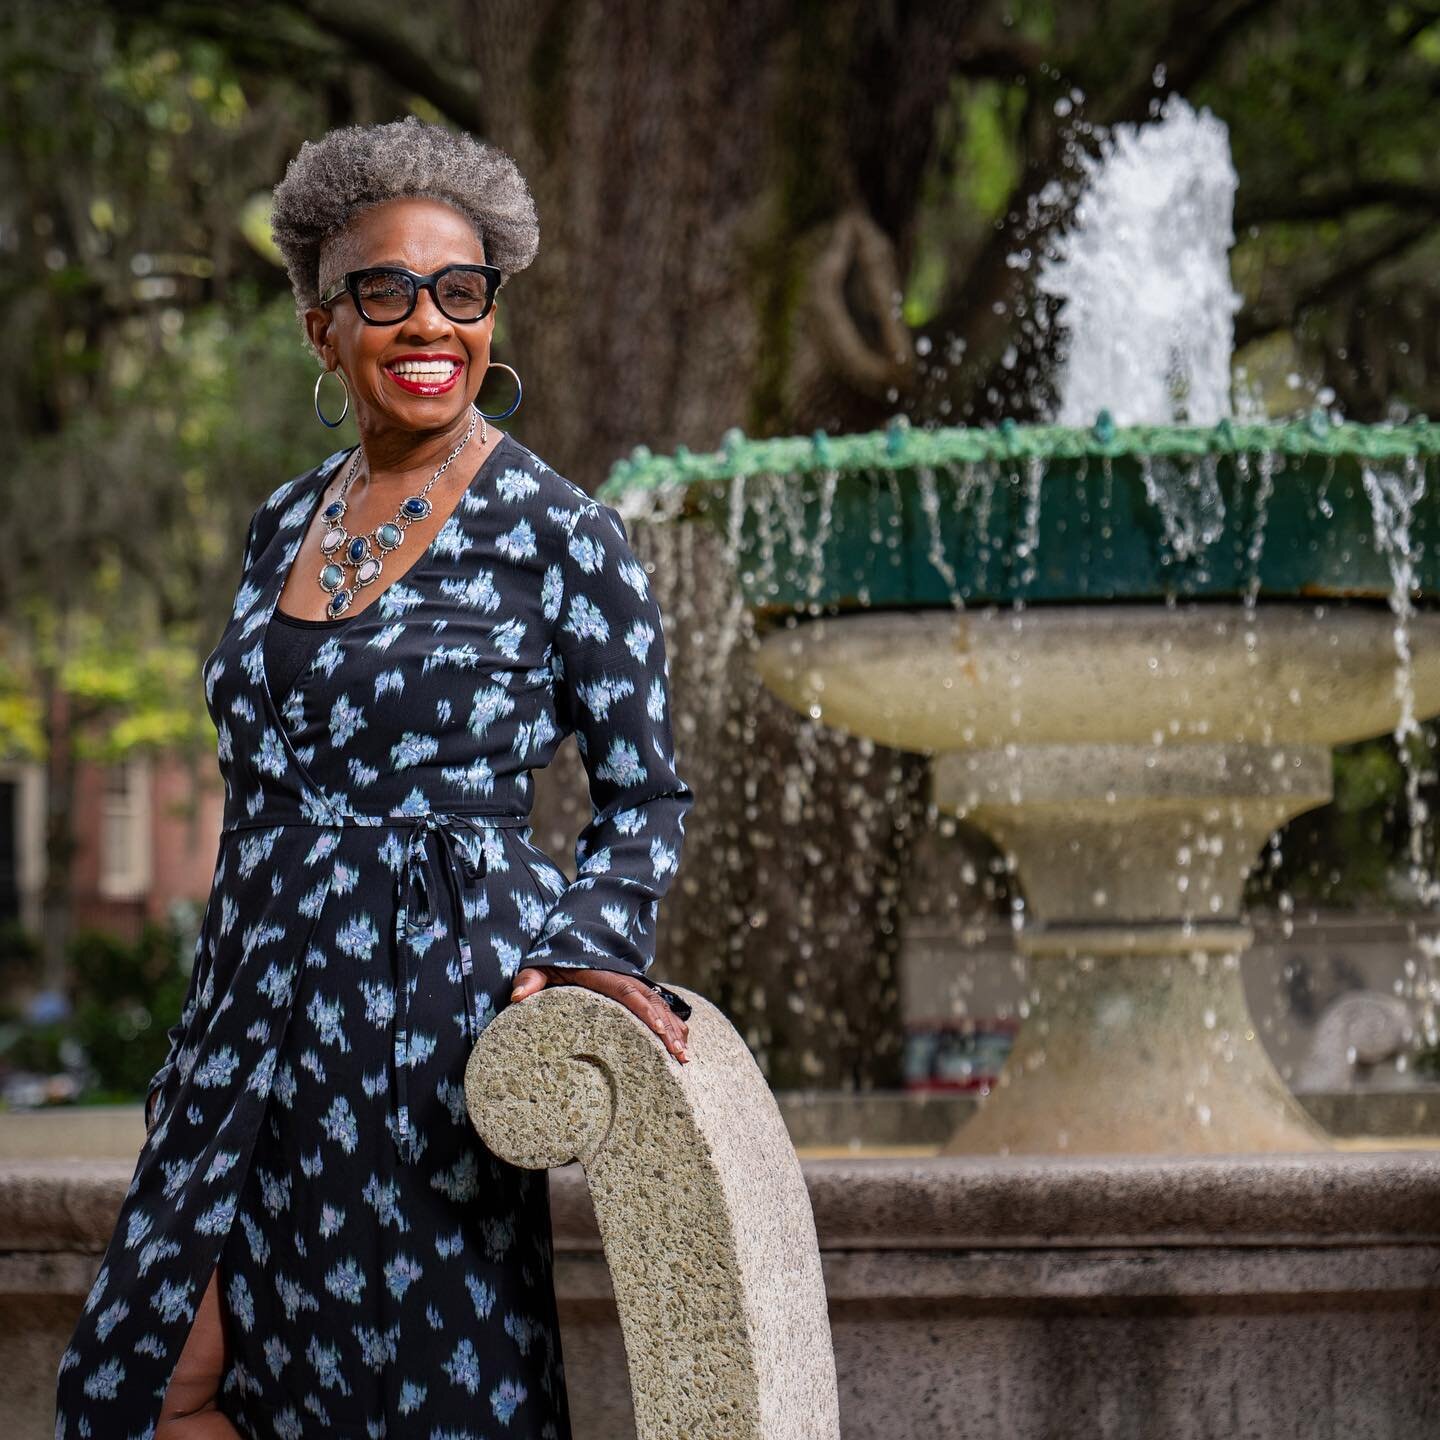 Inner beauty shines outwards in the photographs we create. Feel the love on our website and jump over to @savannahpropermag to learn more about @dolettemcdonald and her fascinating story. 

#savannah #art912 #savannahproper #lumixs5ii #lumix #artist